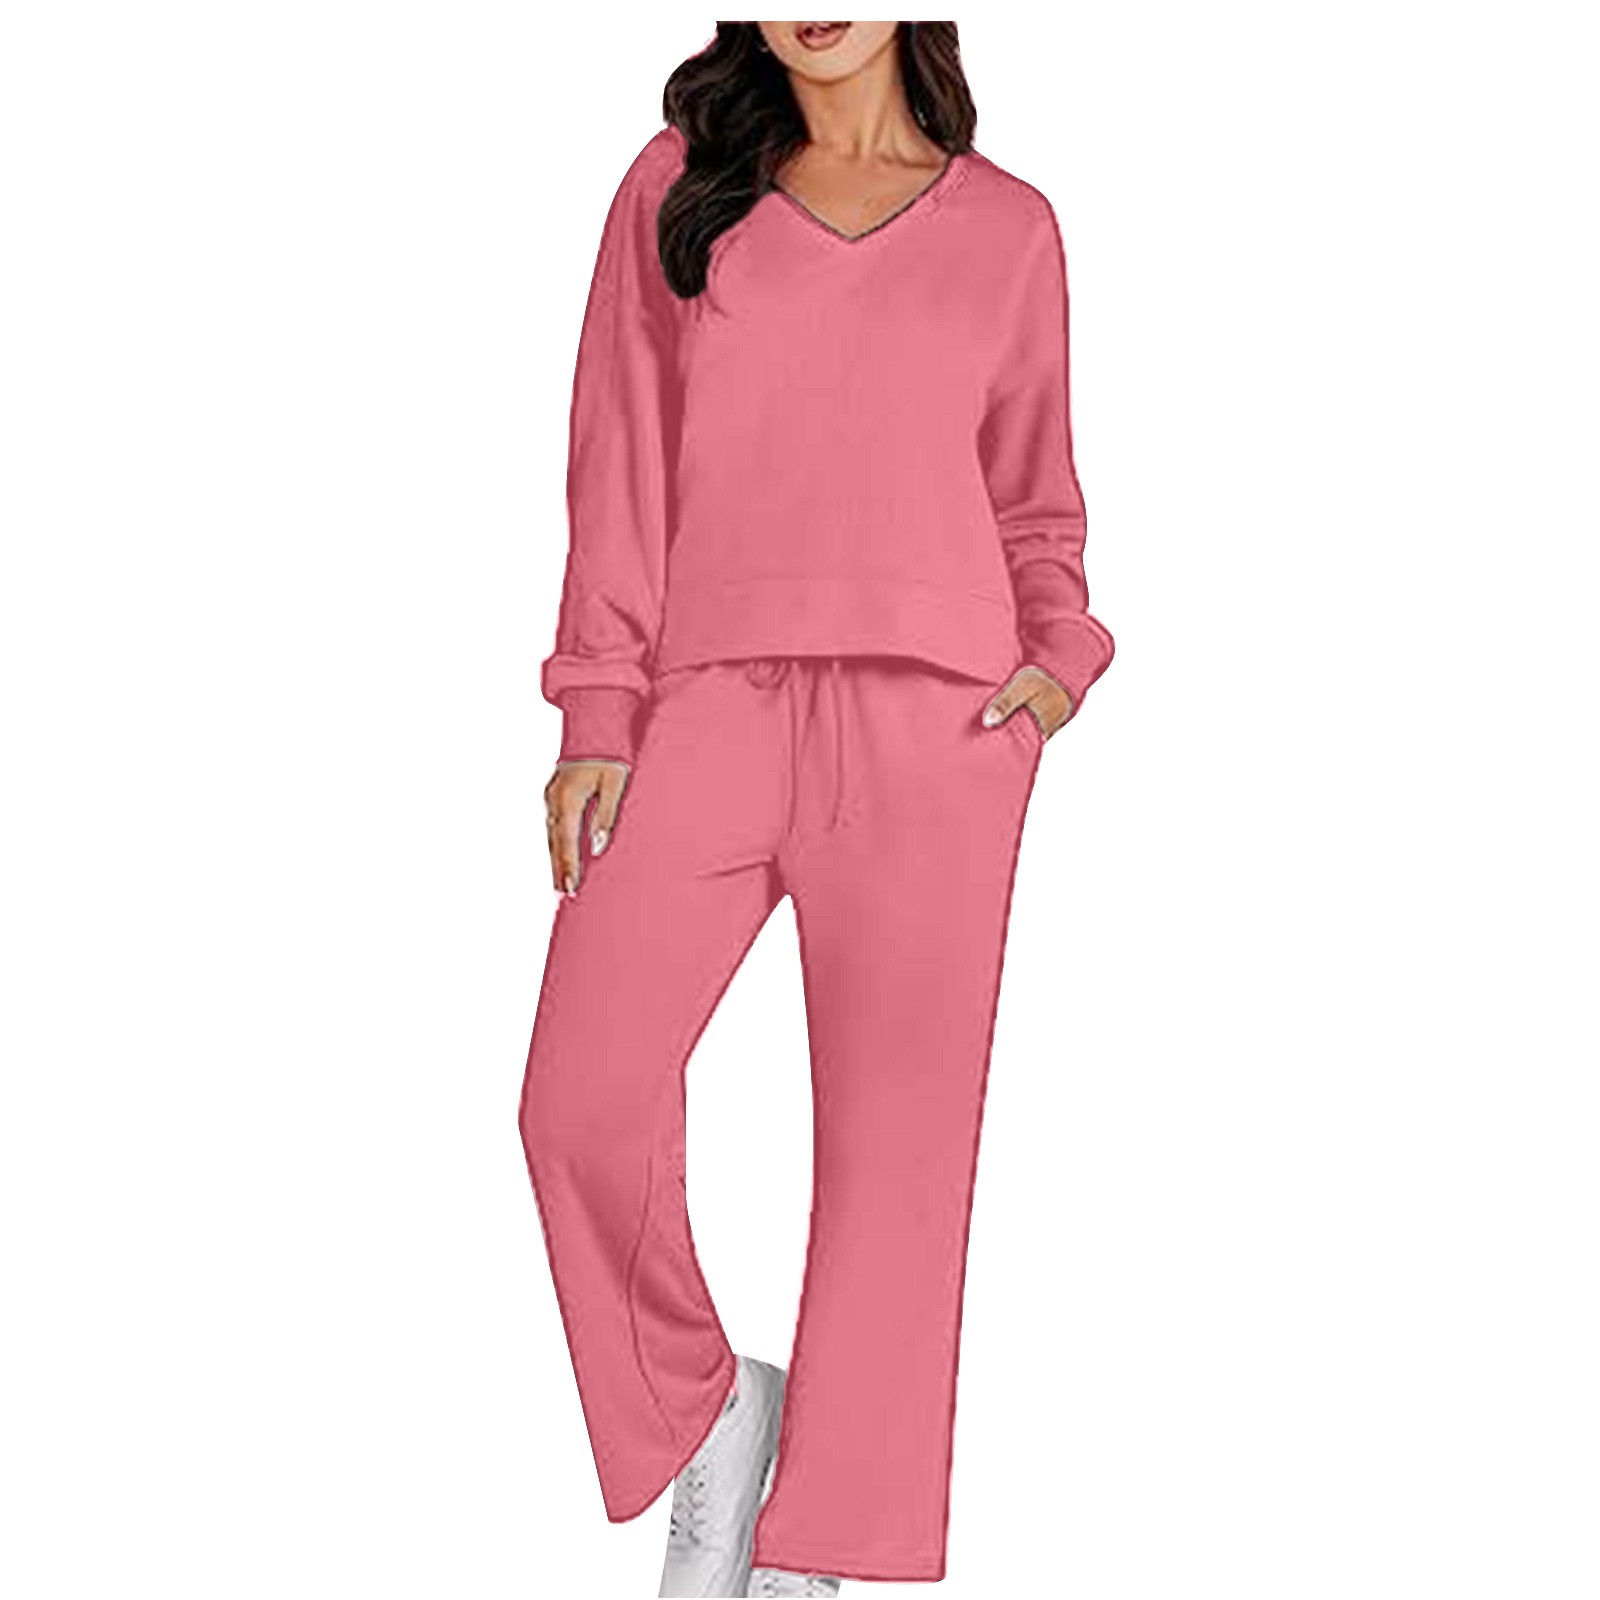 Holiday Deals Yievot Women's Solid Sweatsuits Set 2 Piece Outfits Long ...